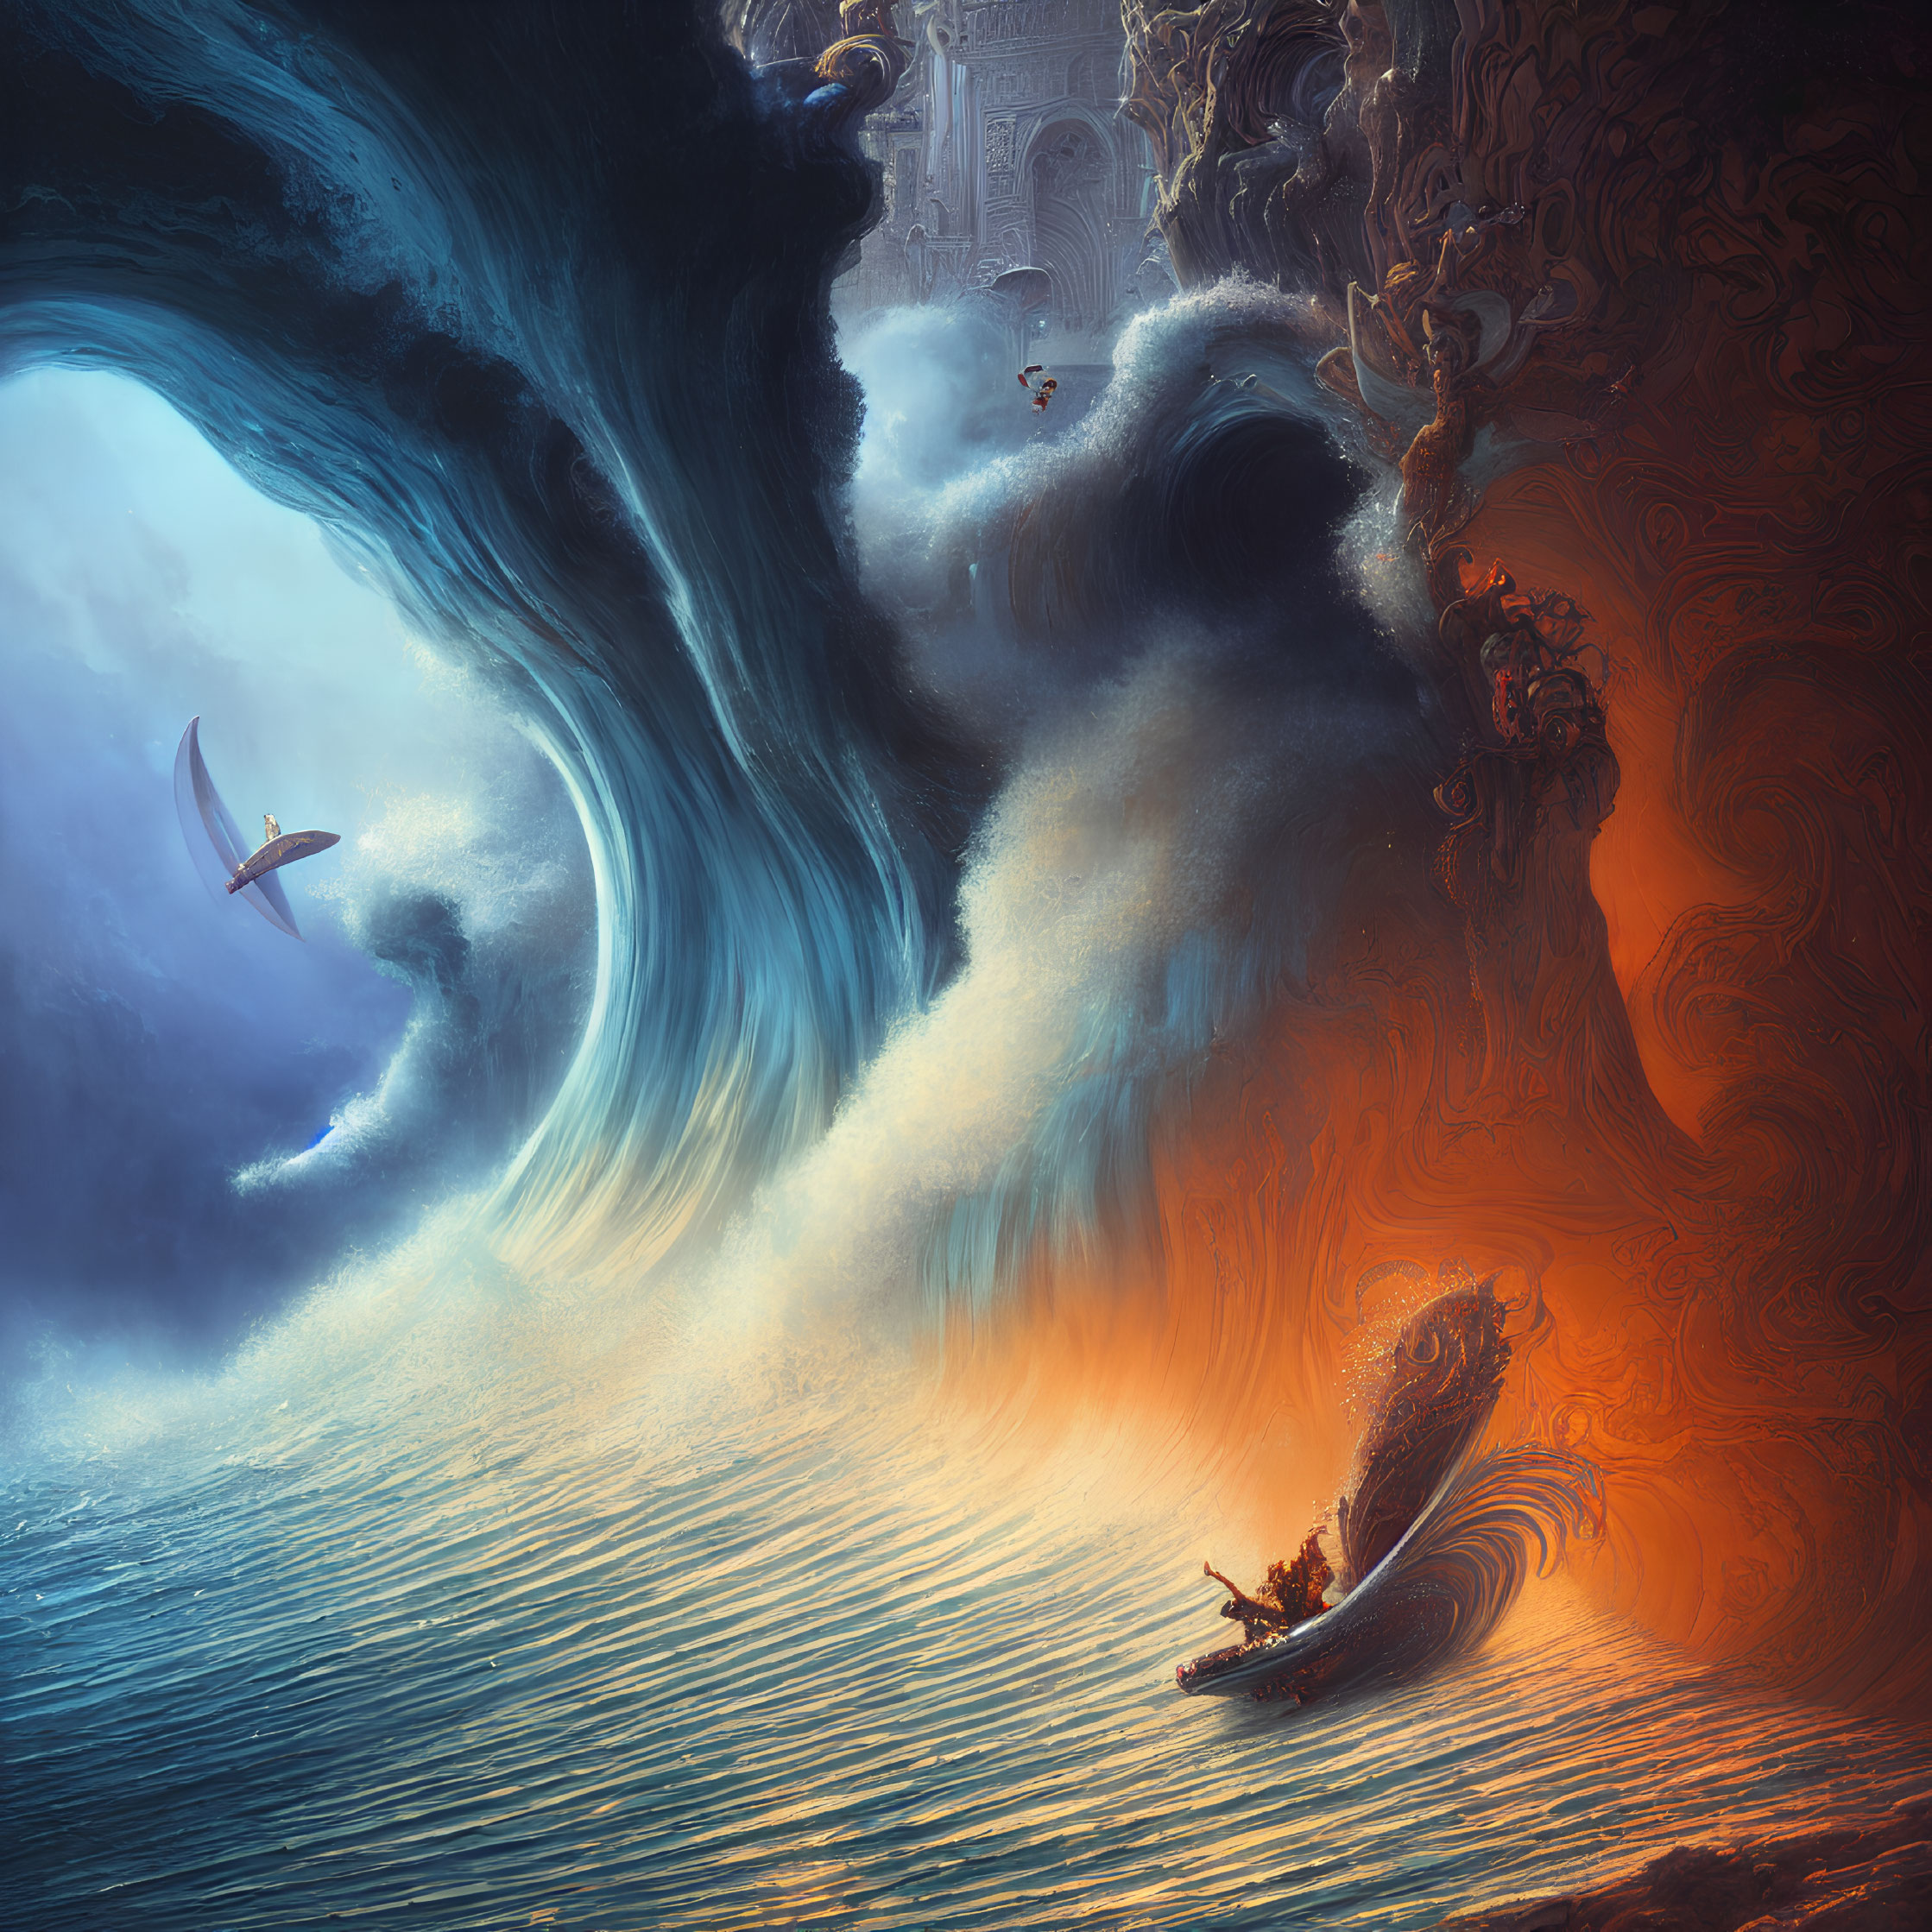 Fantastical painting of small boat in swirling ocean waves with dragon and castle